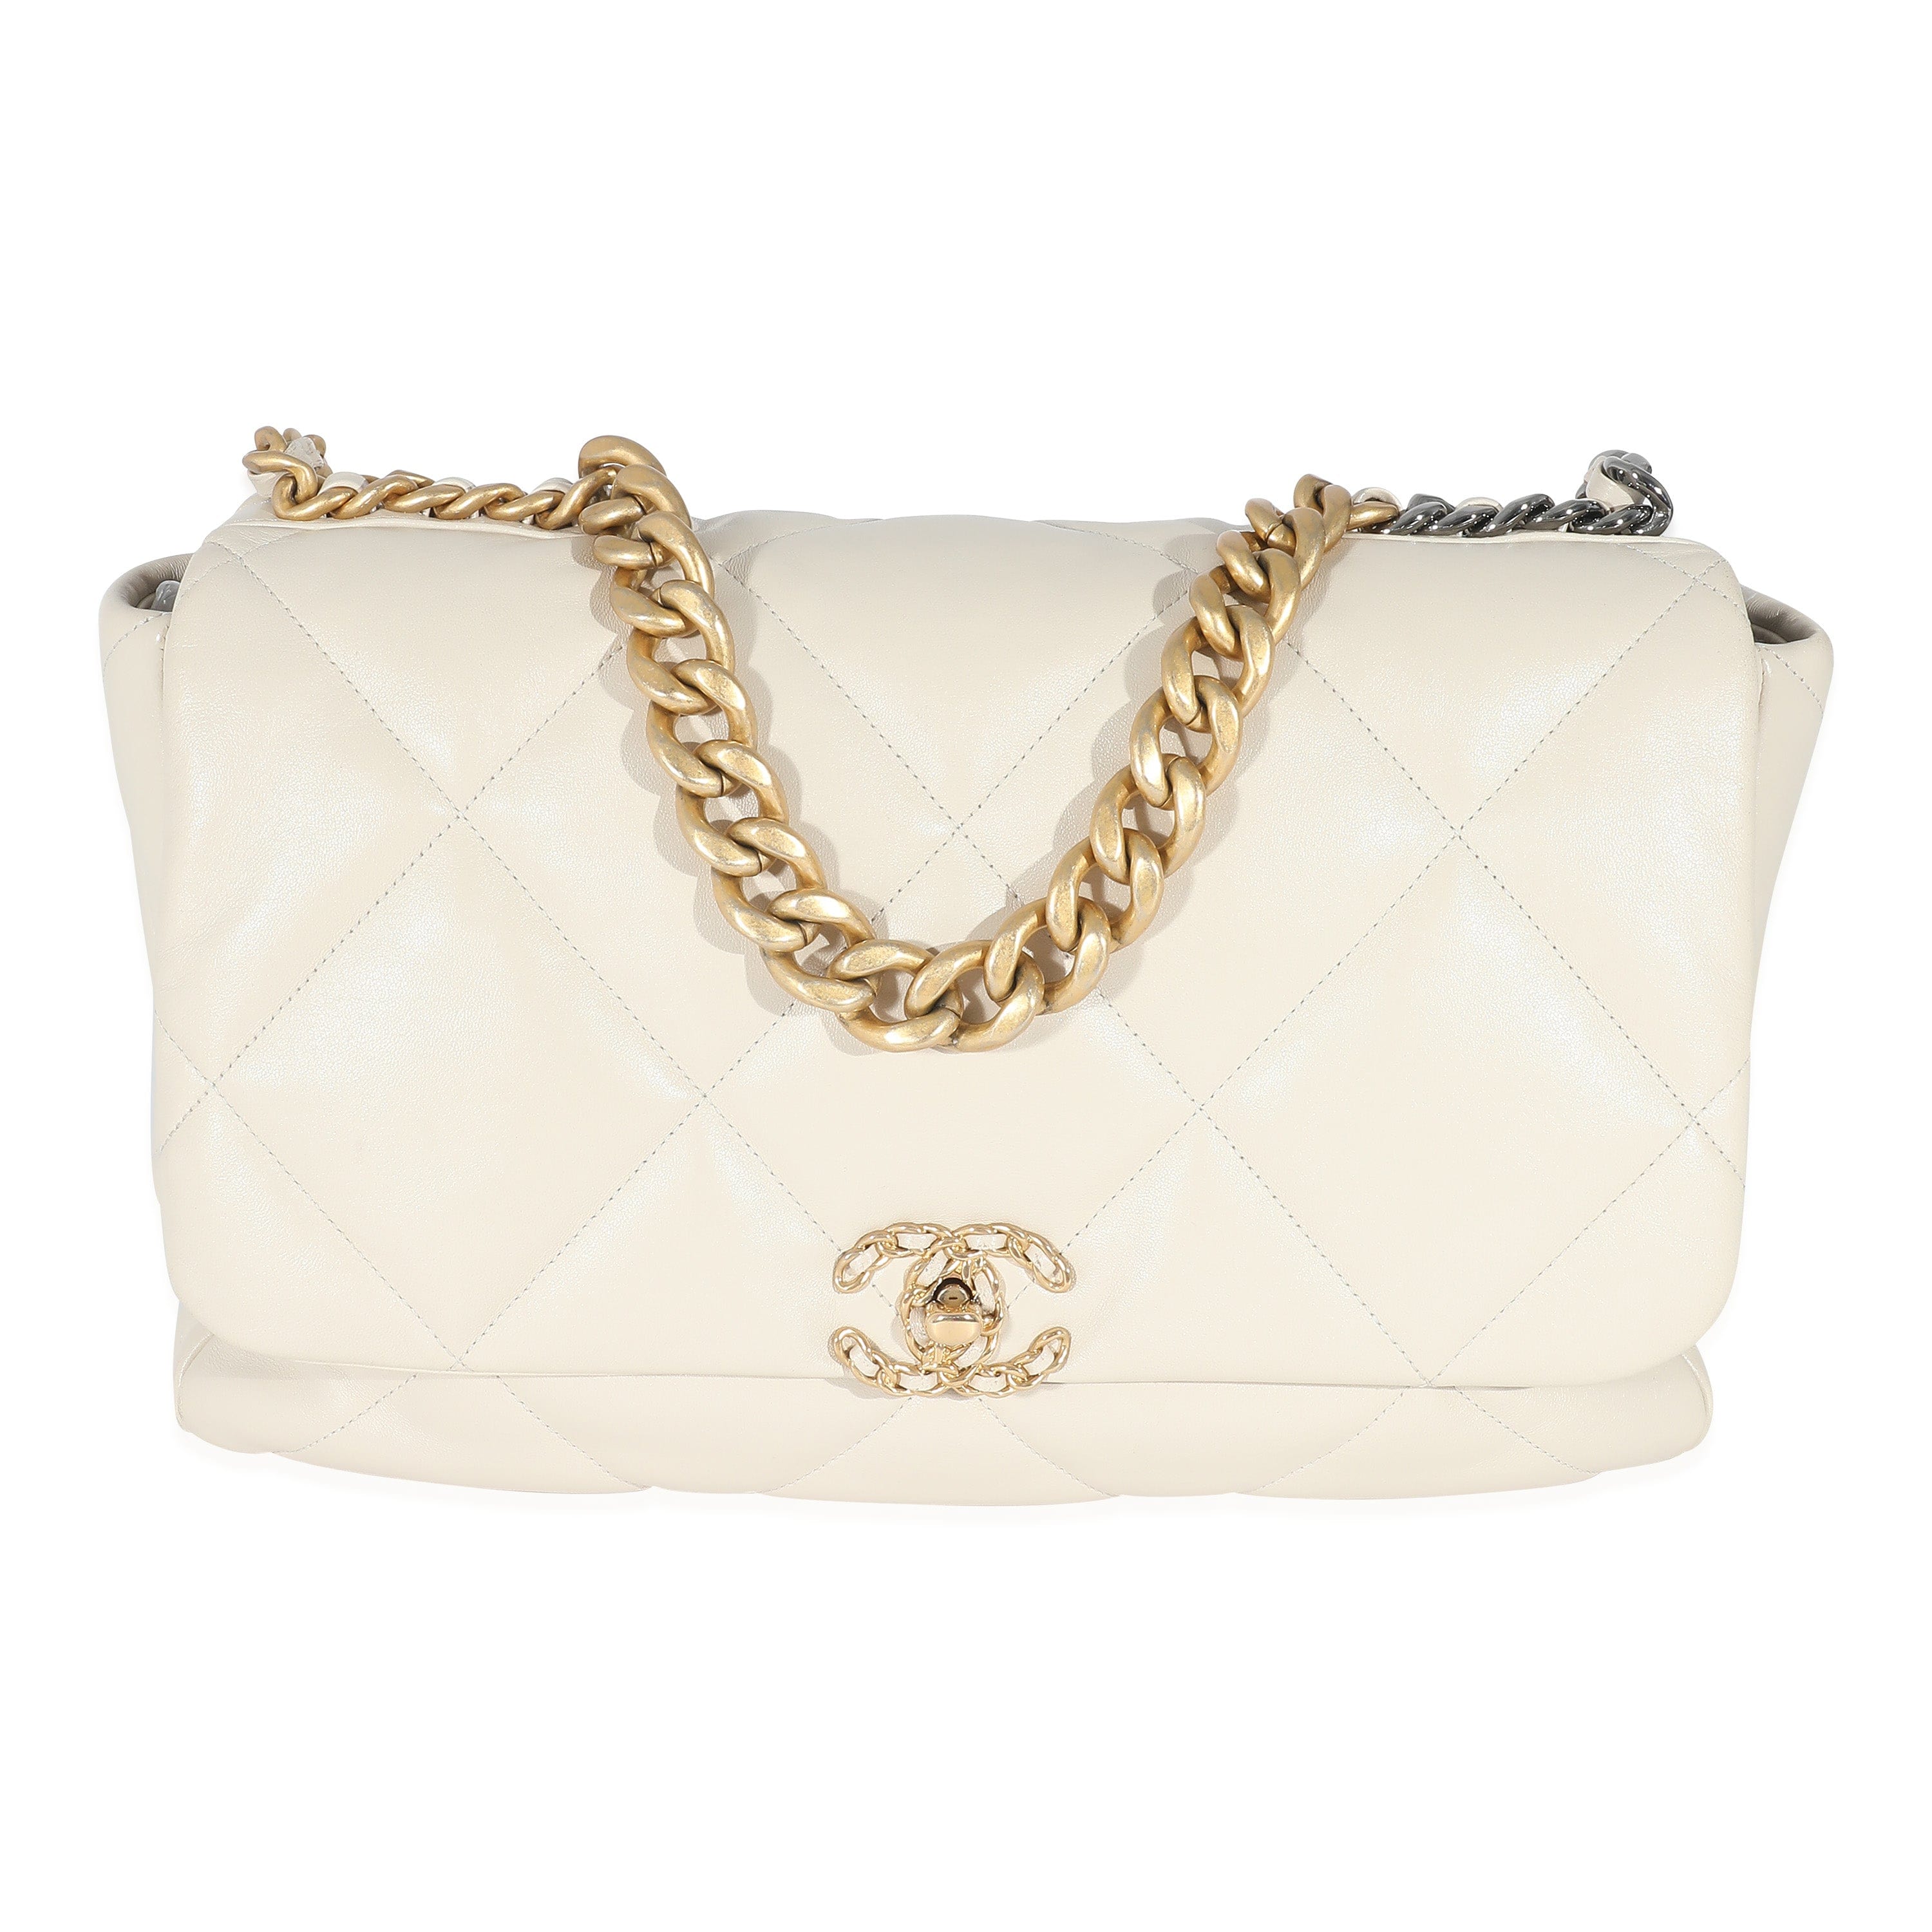 Chanel Chanel Ivory Shiny Quilted Lambskin Maxi Chanel 19 Flap Bag